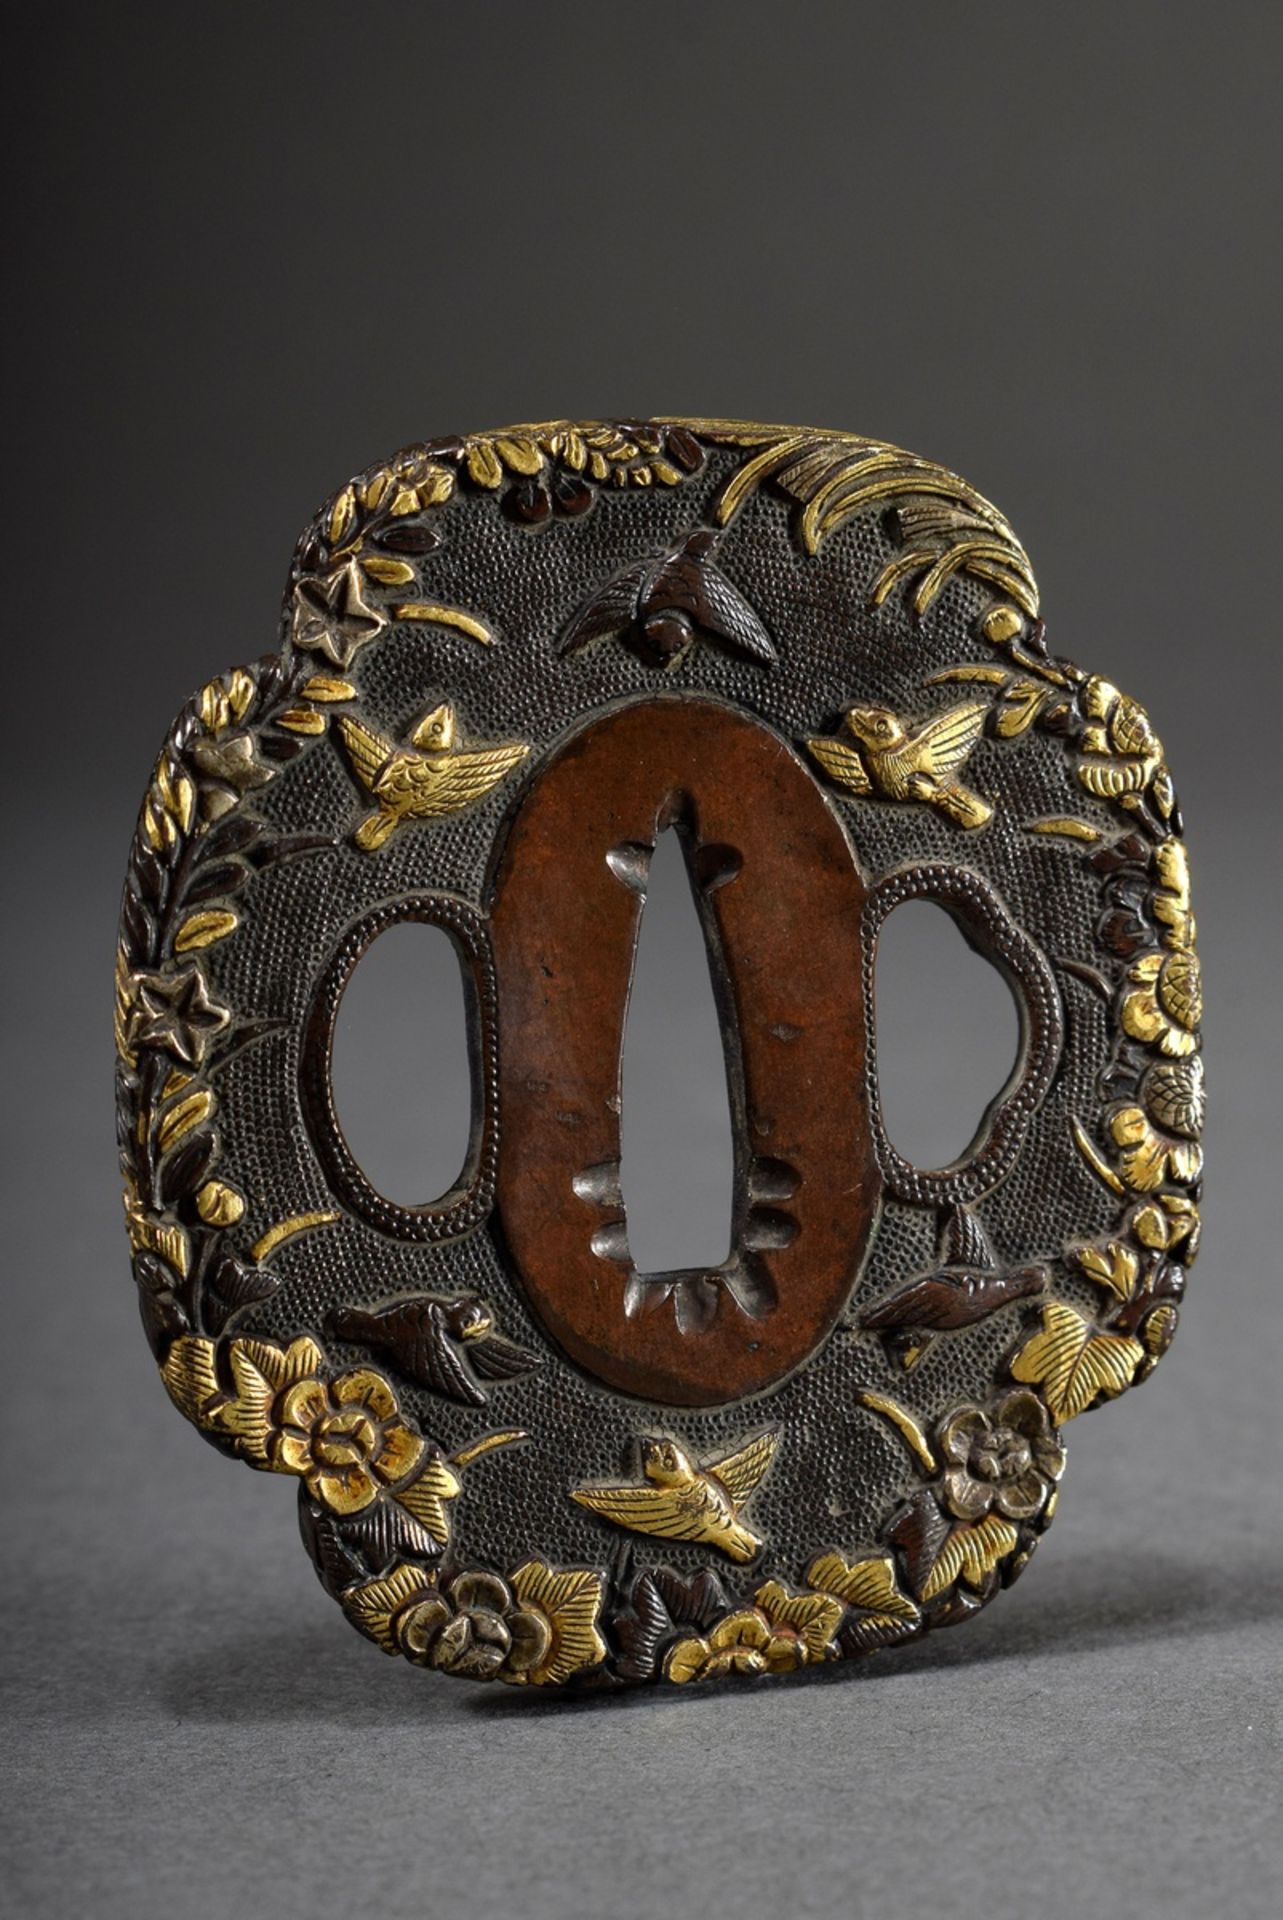 Bronze tsuba with gold inlays "birds and blossoms", Japan, 7x6cm, slight signs of age - Image 2 of 4